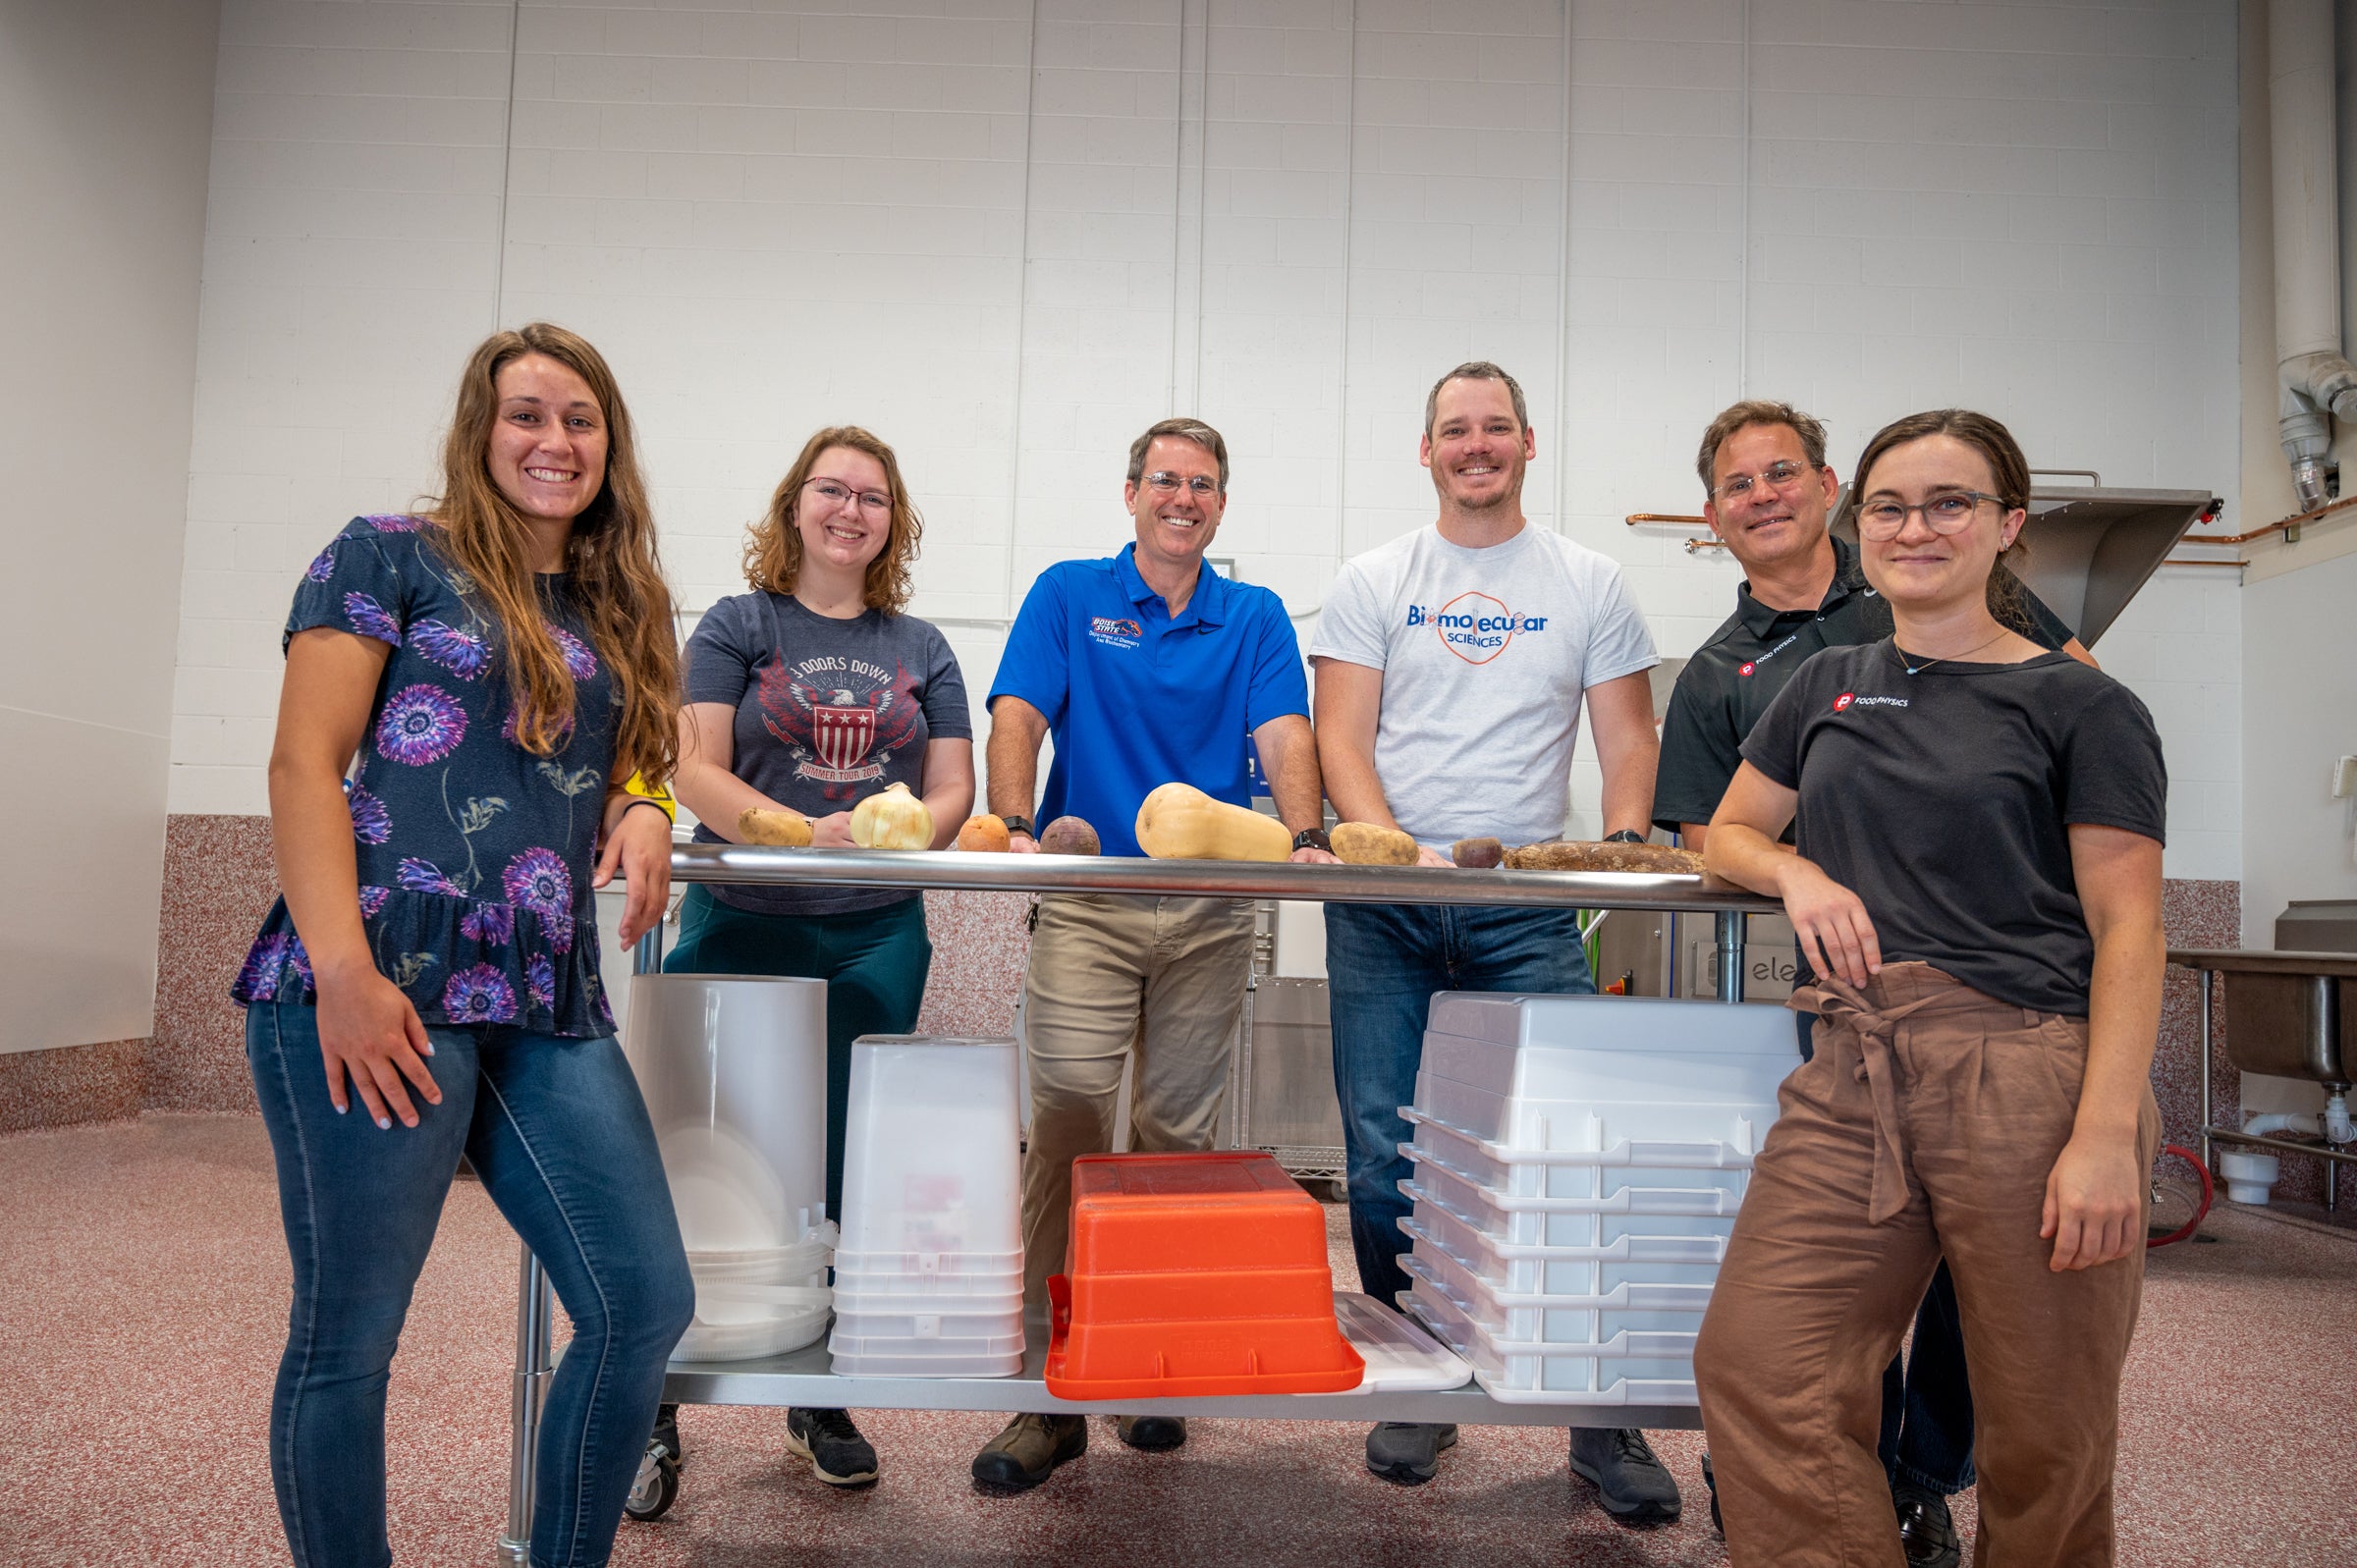 Owen McDougal (third from left) in collaboration with Boise-based company Food Physics. Photo by Priscilla Grover.